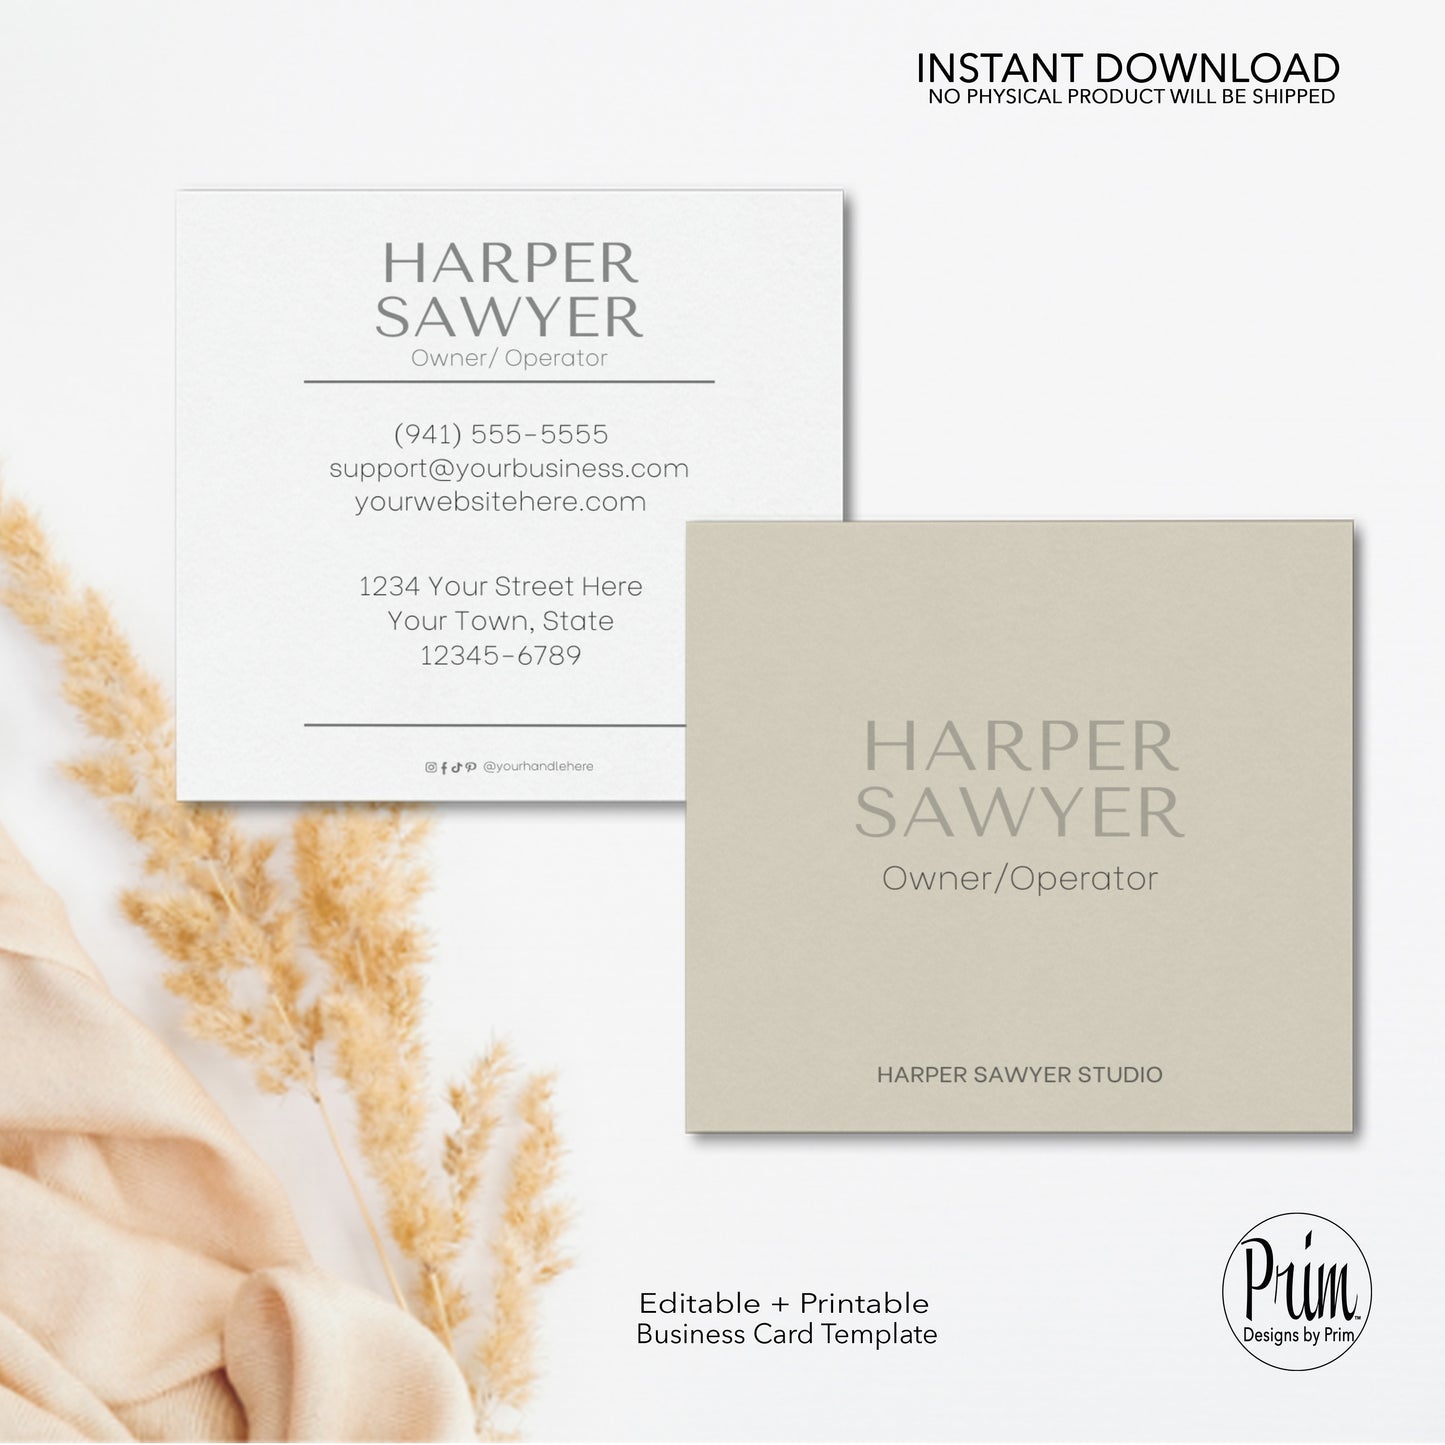 Designs by Prim Designs by Prim Simply Modern Business Card | Editable Business Card | Health Beauty Hair Business Template | Design Studio Card | Realtor Card Template